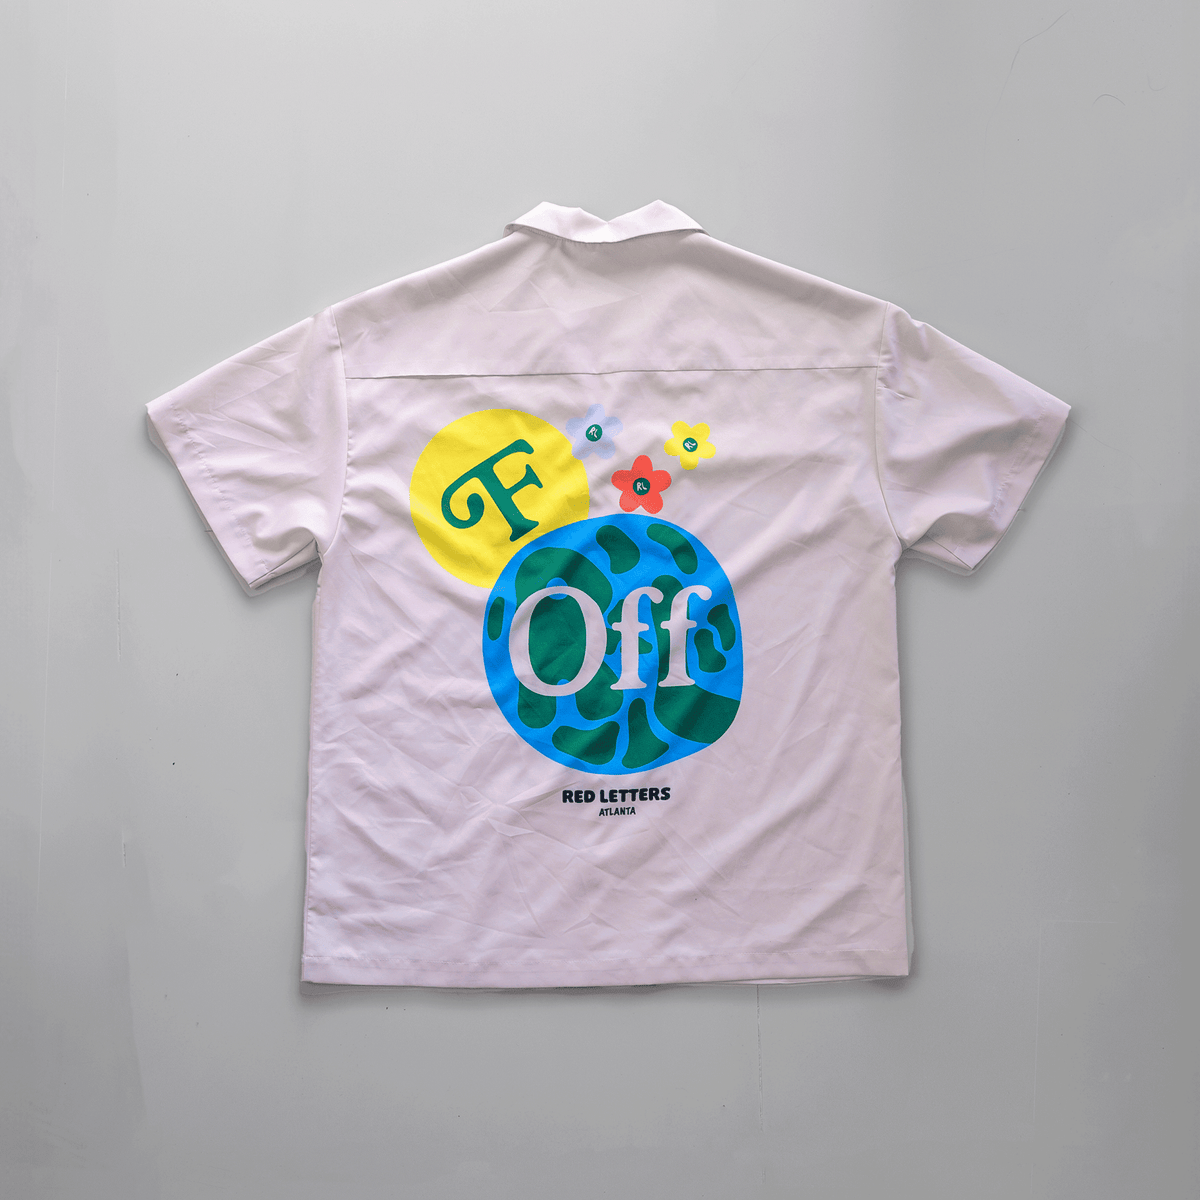 F OFF Lapel Shirt - RED LETTERS